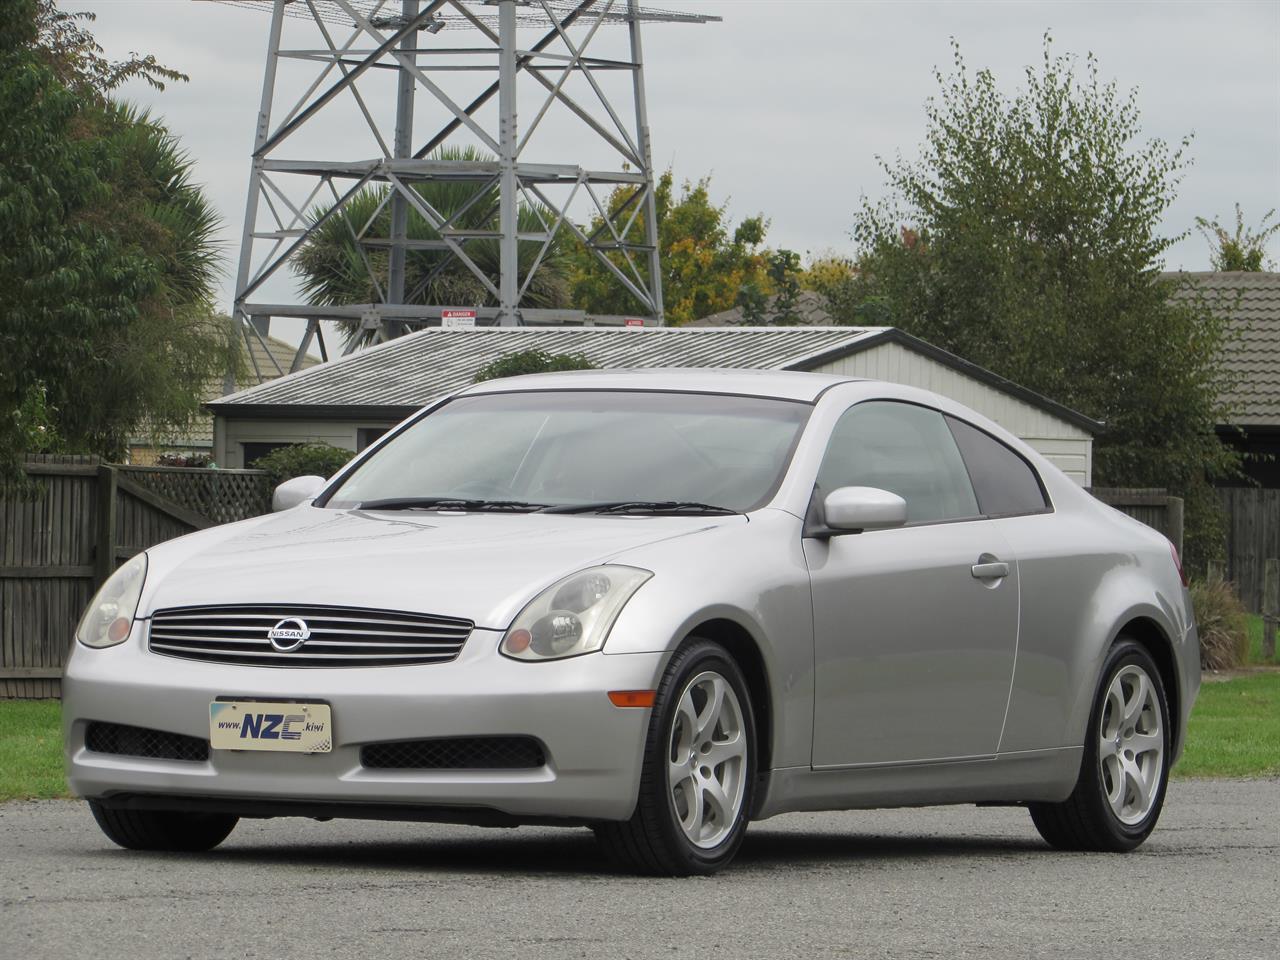 2005 Nissan SKYLINE only $57 weekly